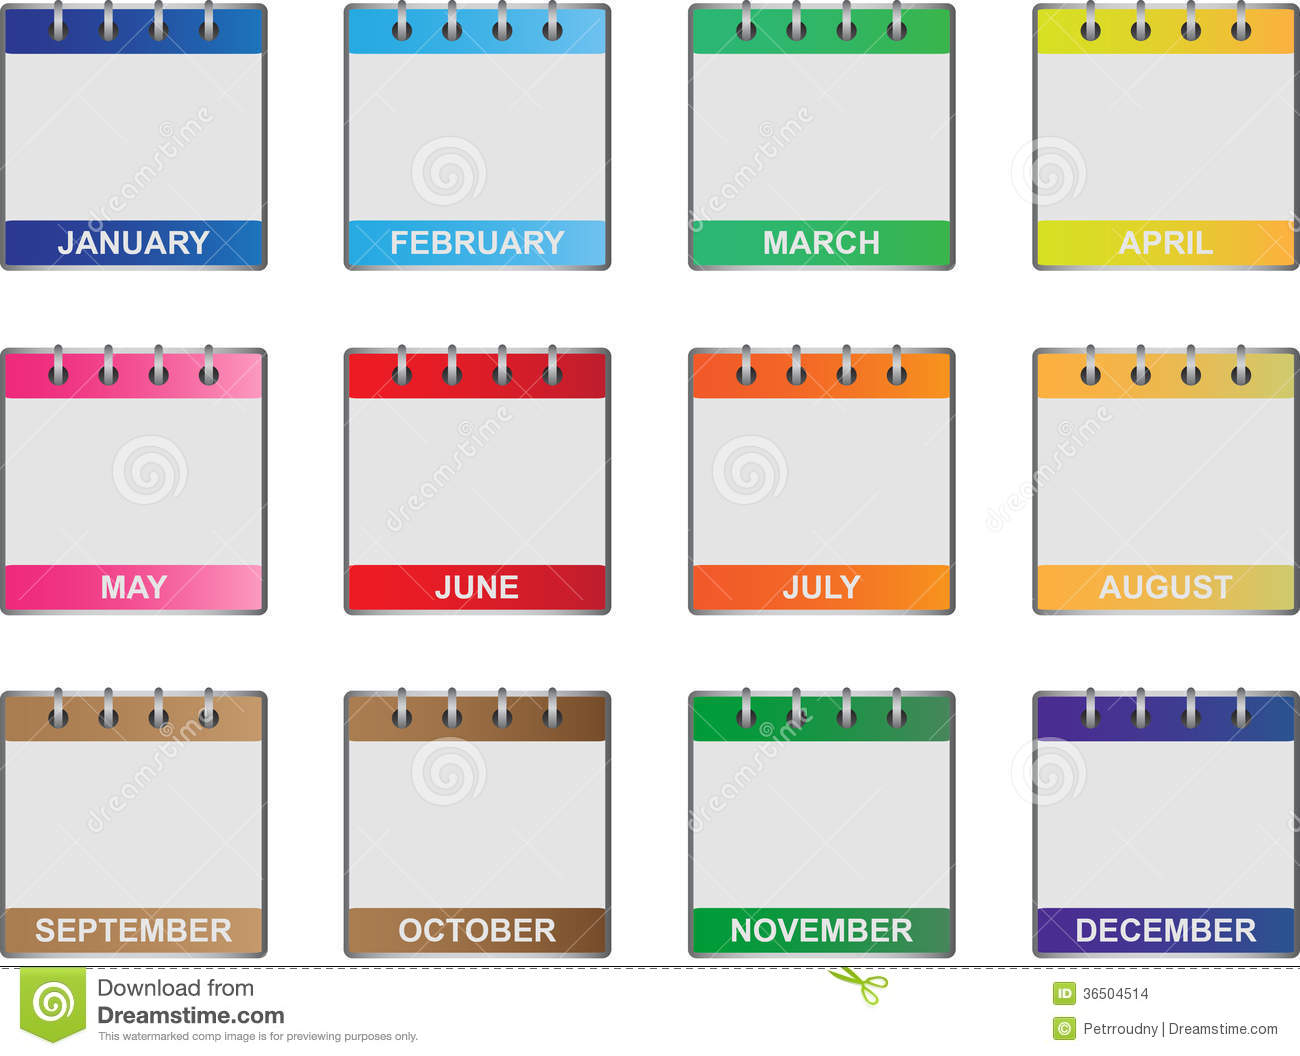 Calendar of All 12 Months of the Year